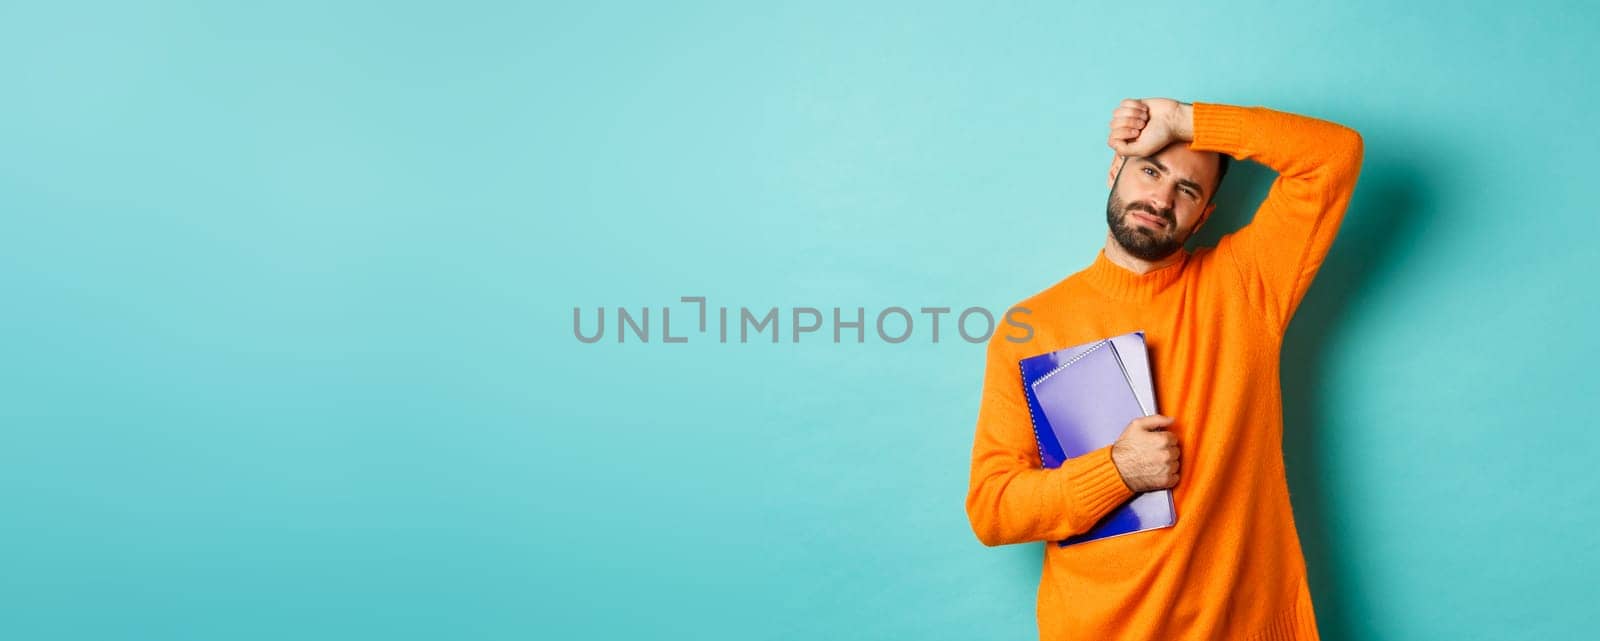 Education. Tired male student holding notebooks and wiping sweat off forehead, looking exhausted, standing in orange sweater against turquoise background.